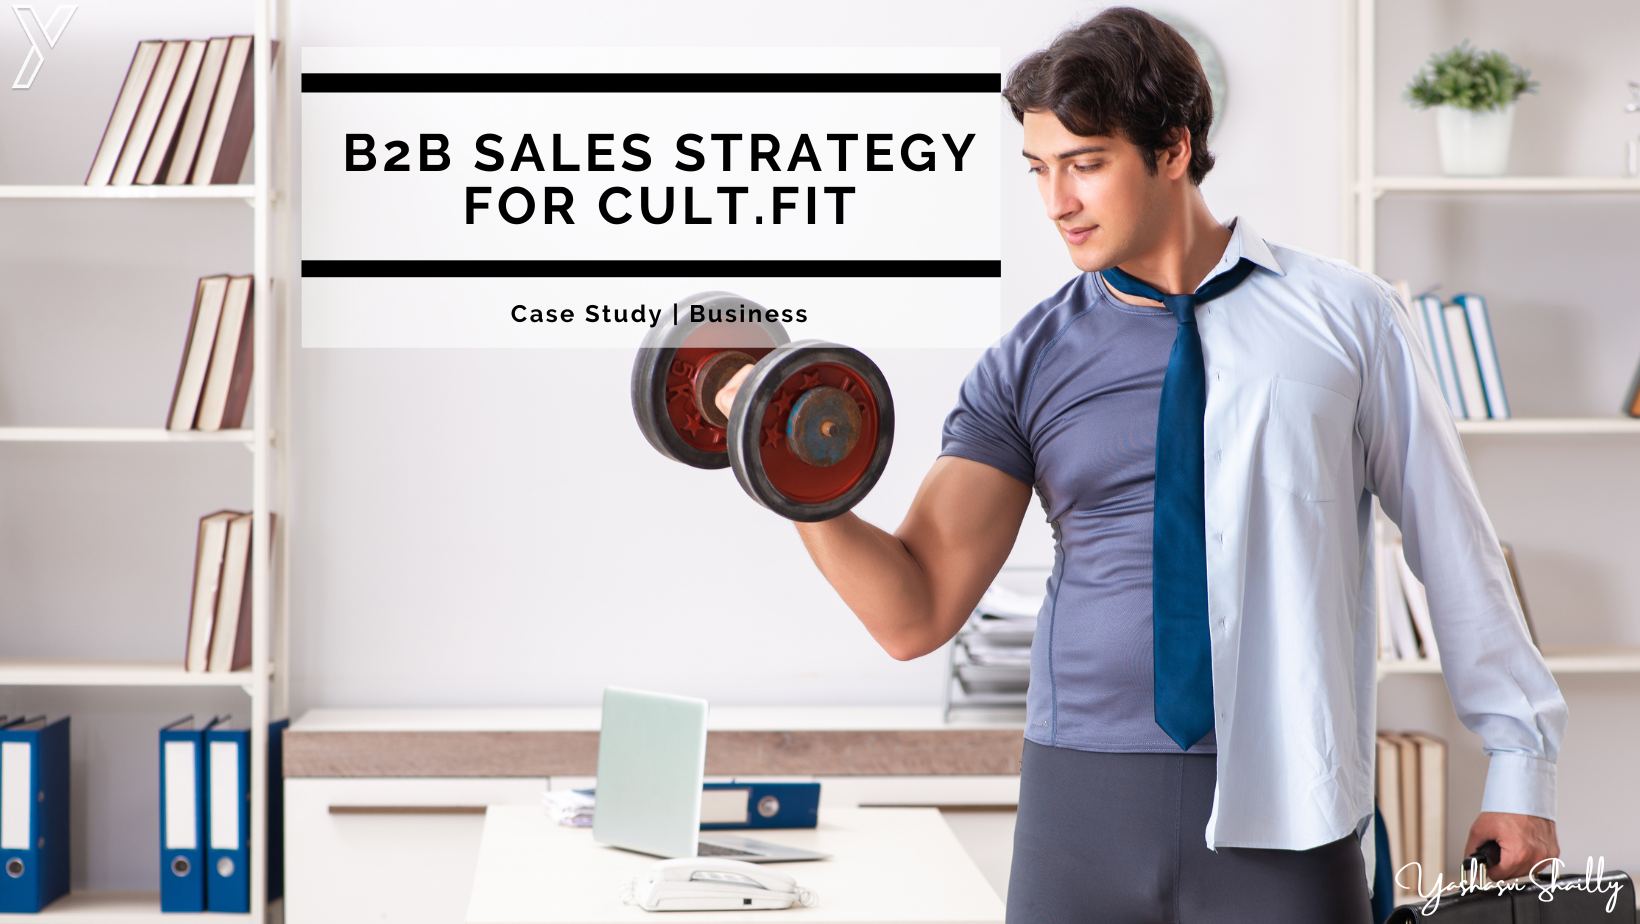 B2B Sales Strategy for Cult.fit: Cultivating Corporate Wellness